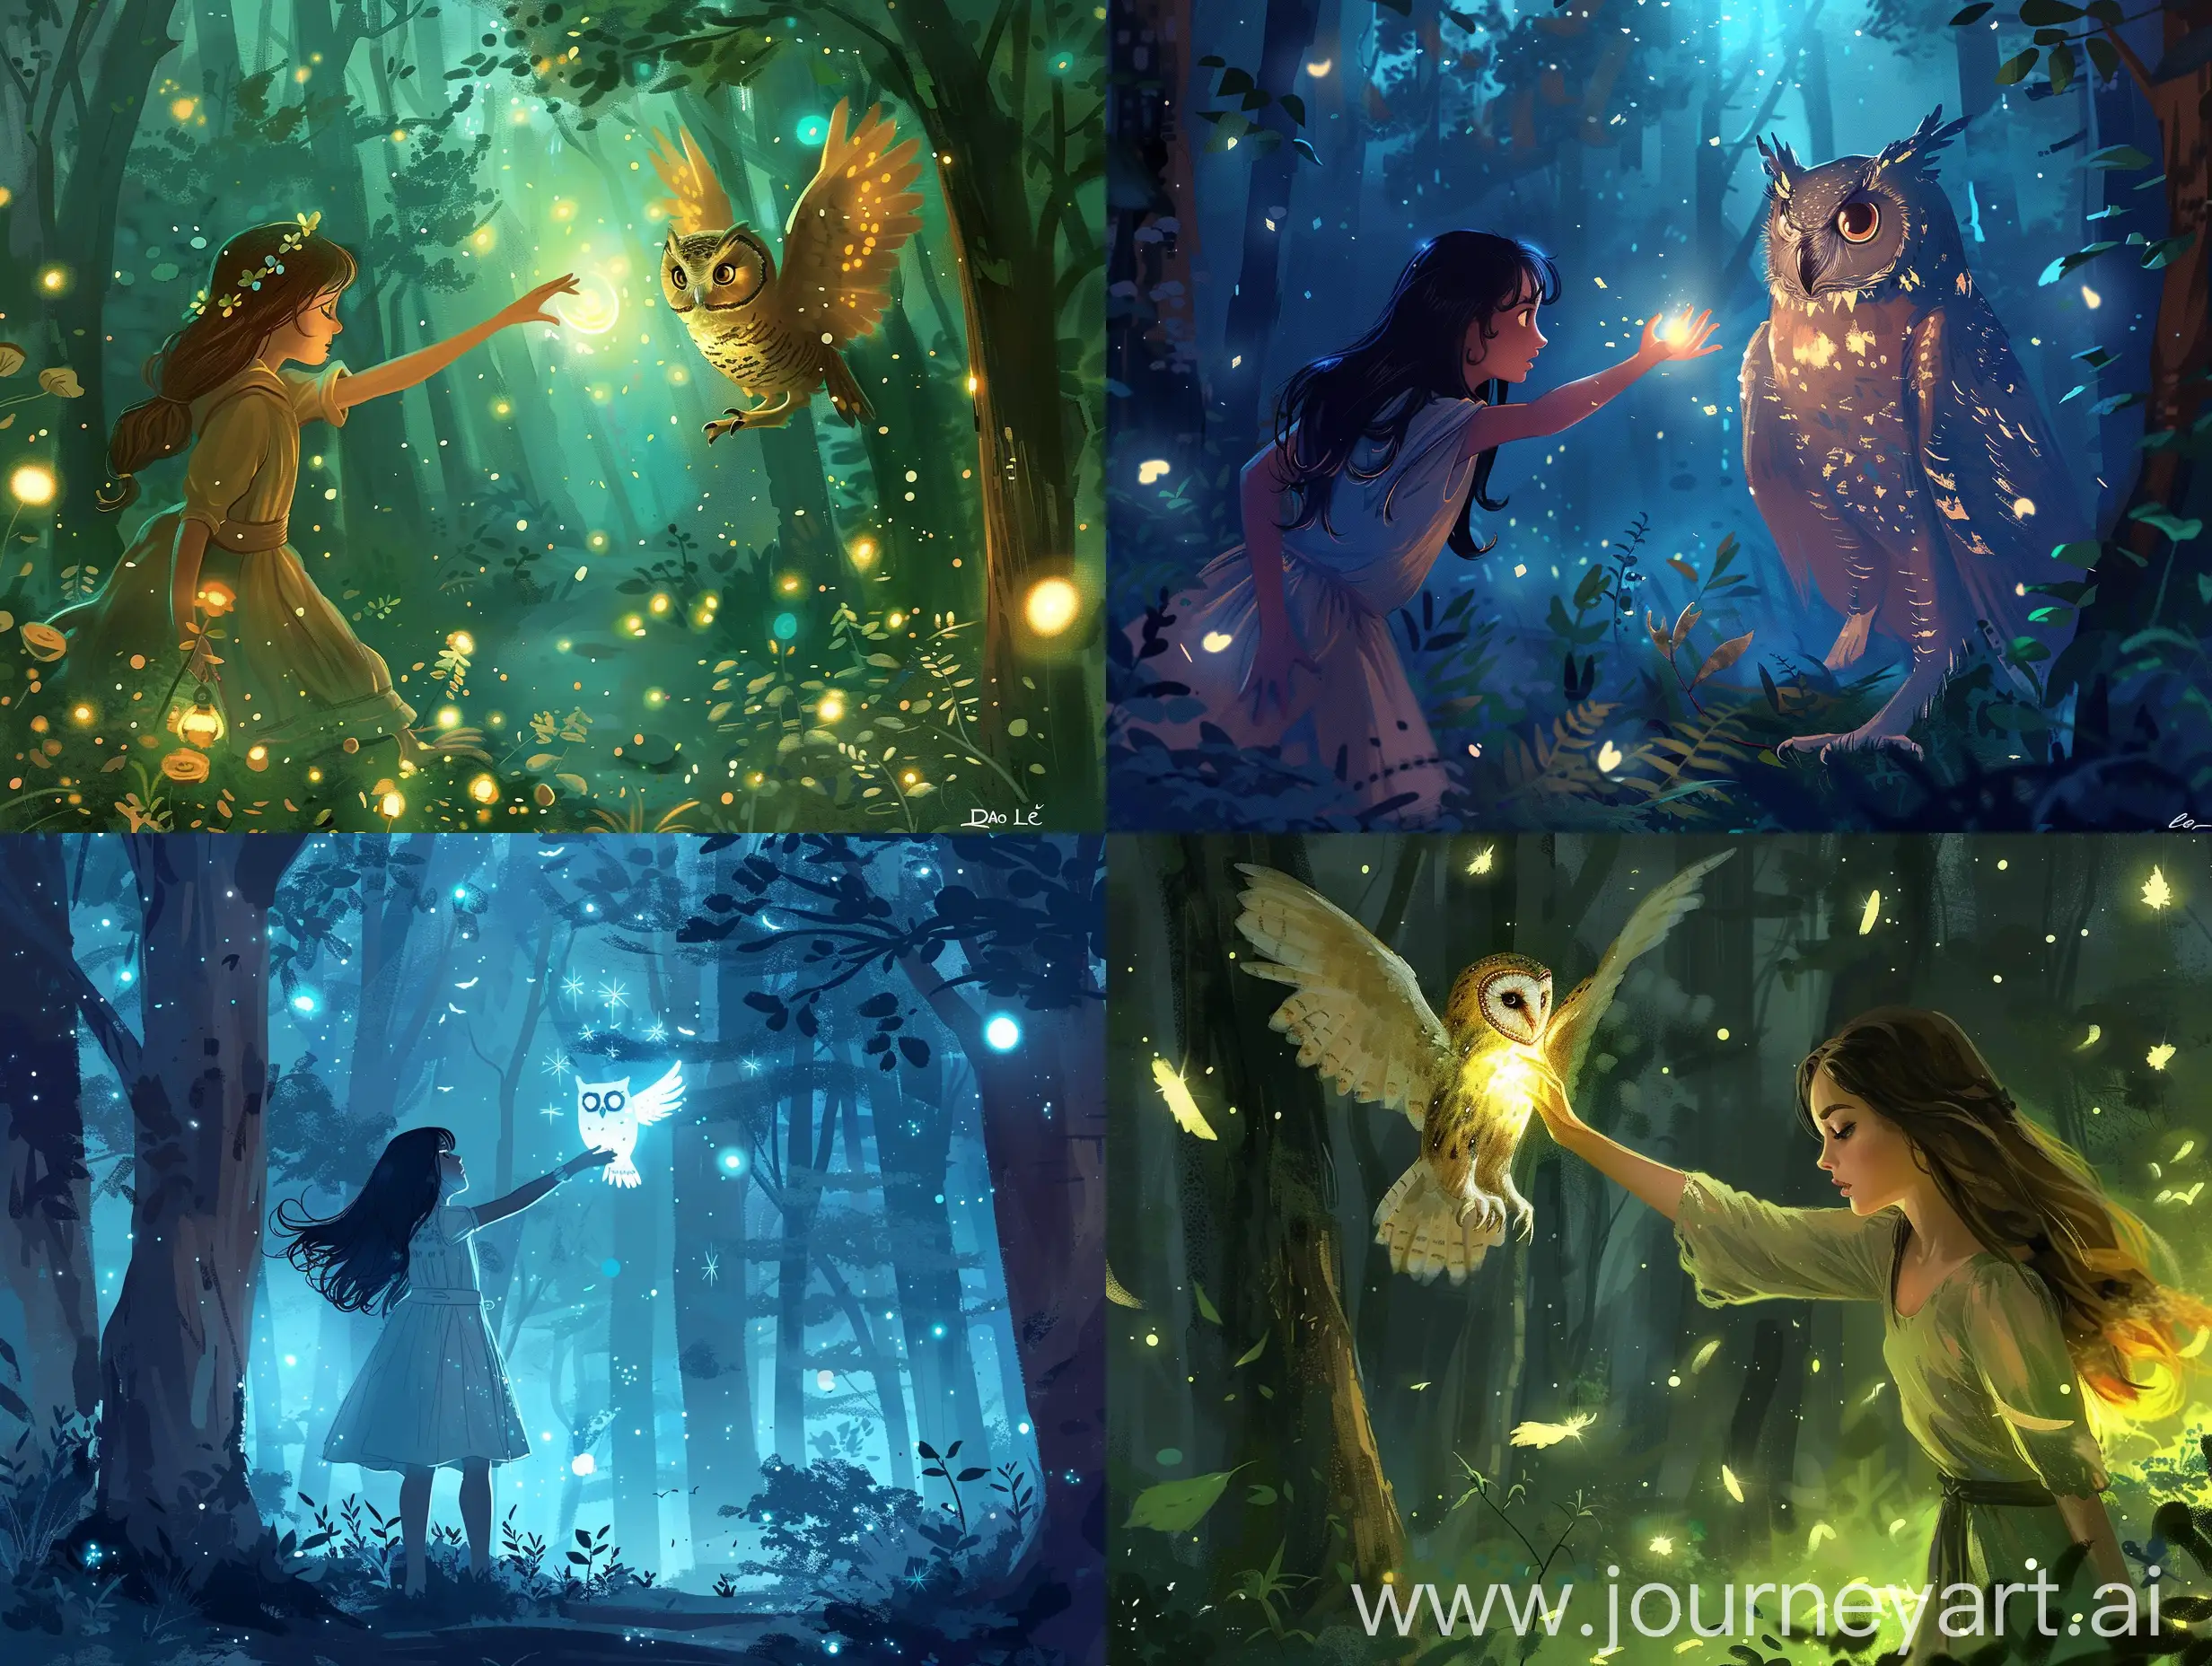 Enchanting-Night-Forest-Scene-with-Princess-Mage-and-Glowing-Owl